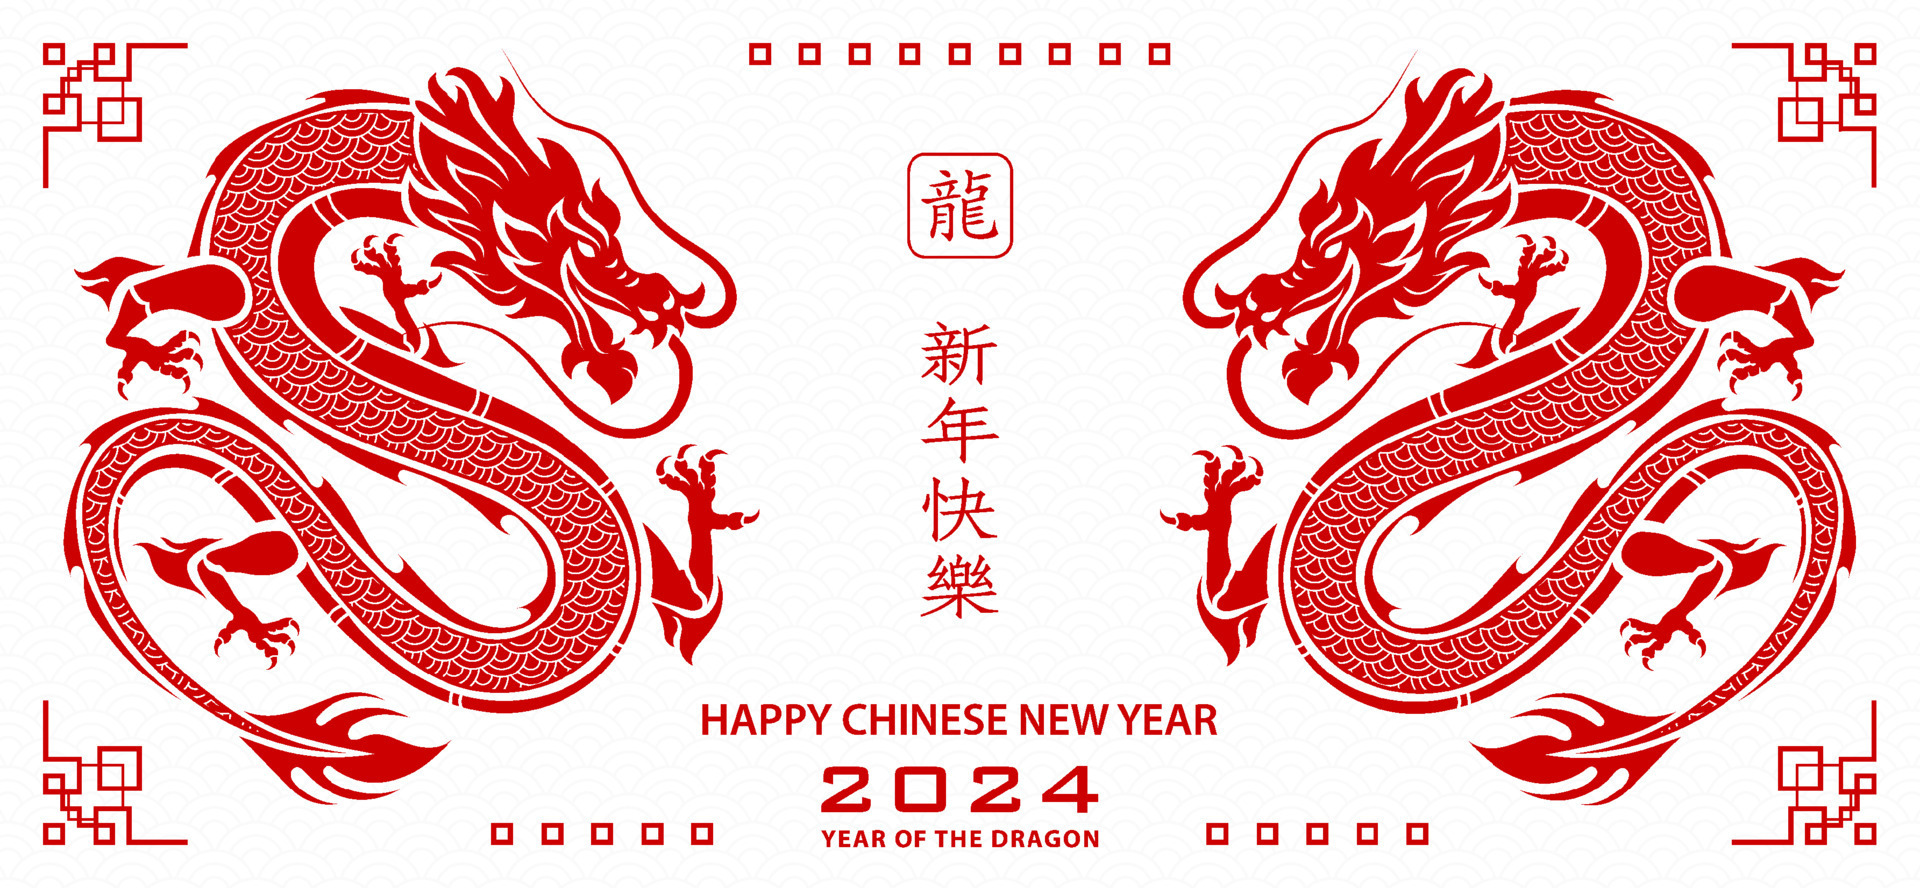 Happy chinese new year 2024 Zodiac sign, year of the Dragon, with red